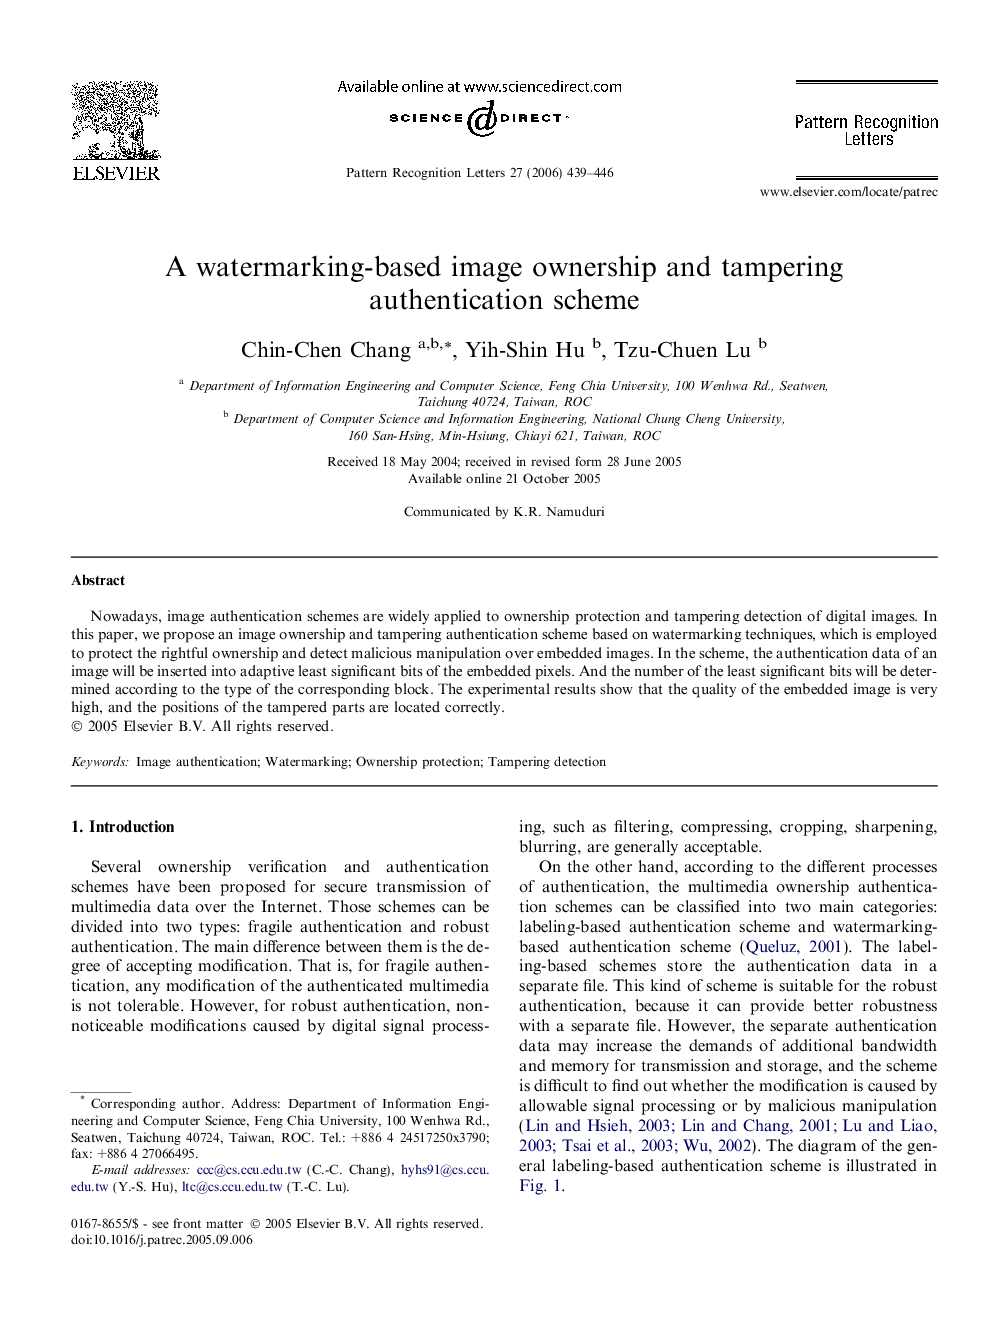 A watermarking-based image ownership and tampering authentication scheme